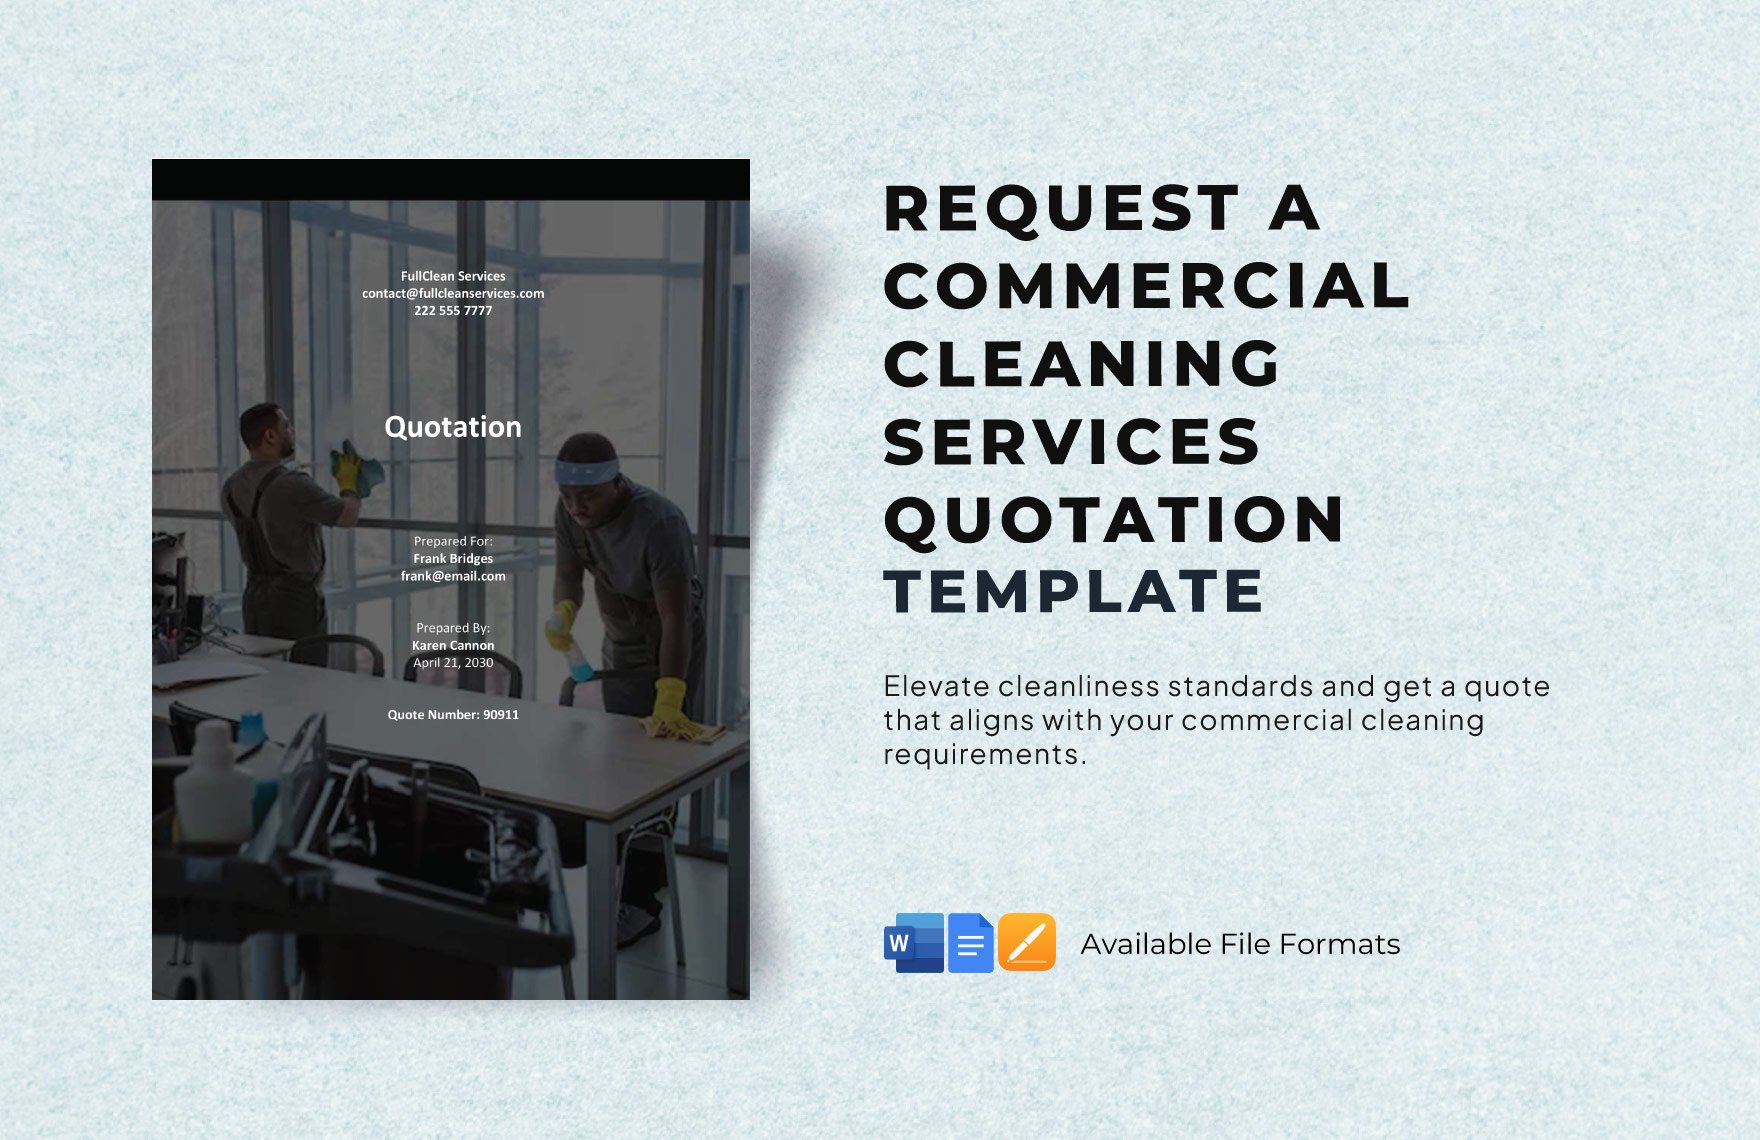 Request a Commercial Cleaning Services Quotation Template in Word, Google Docs, Apple Pages